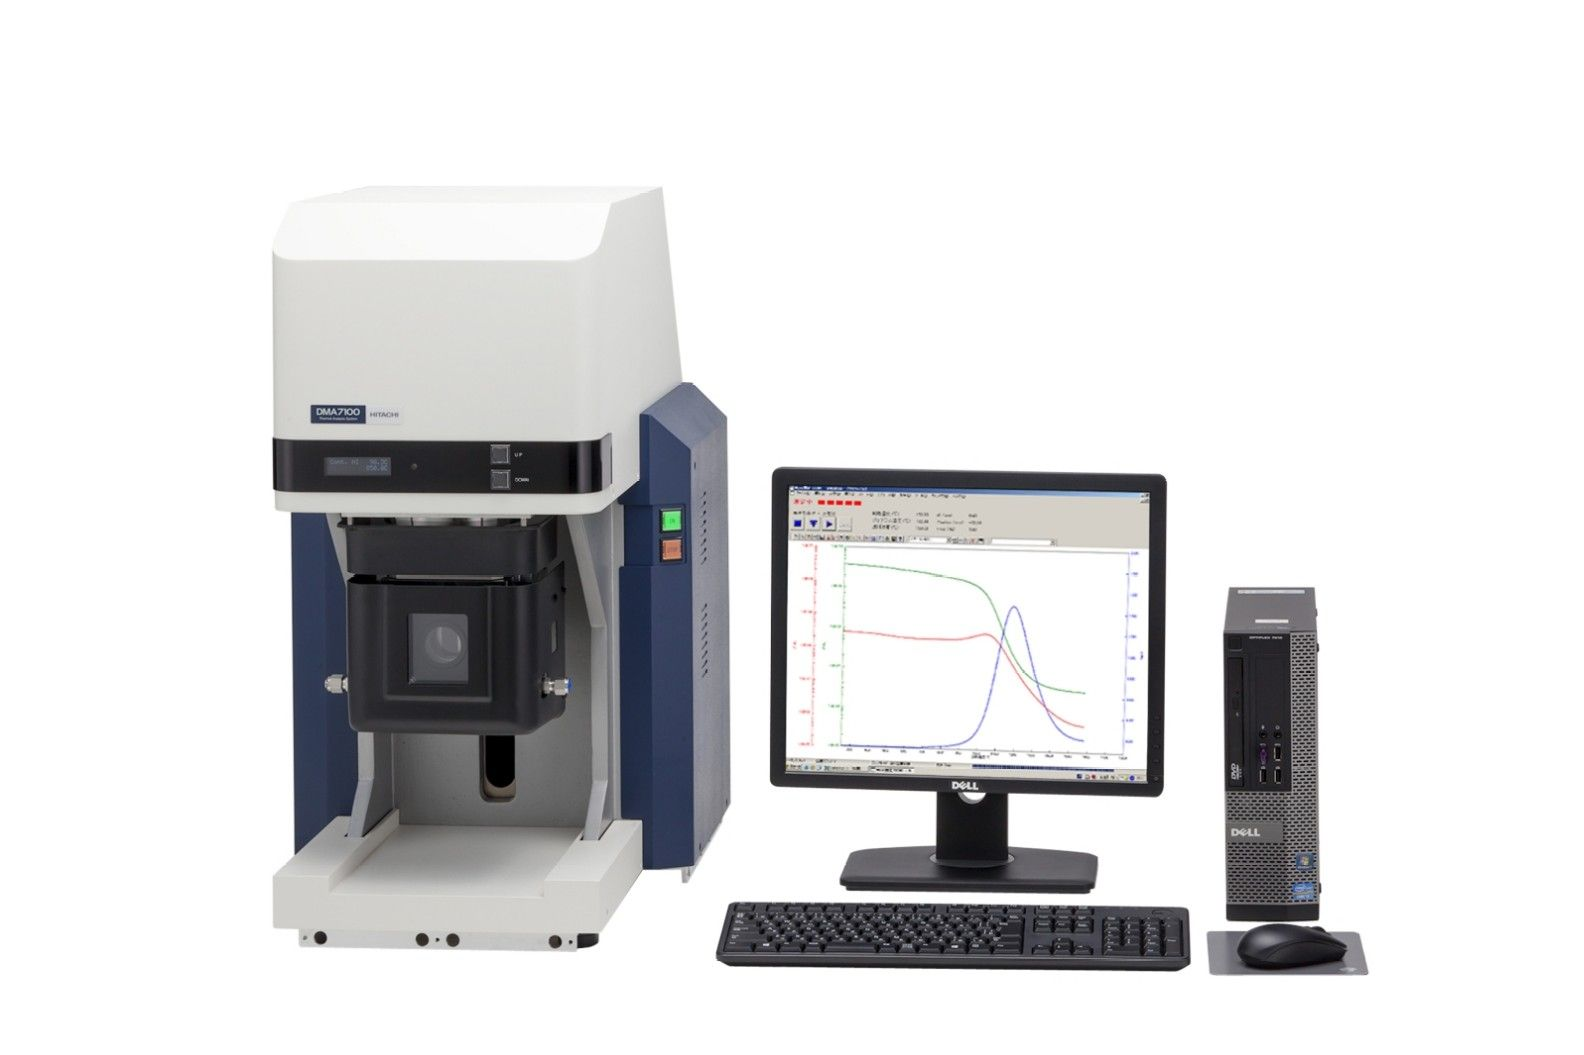 DMA7100 with Real-View and Humidity Control Options to take DMA Testing to the Next Level